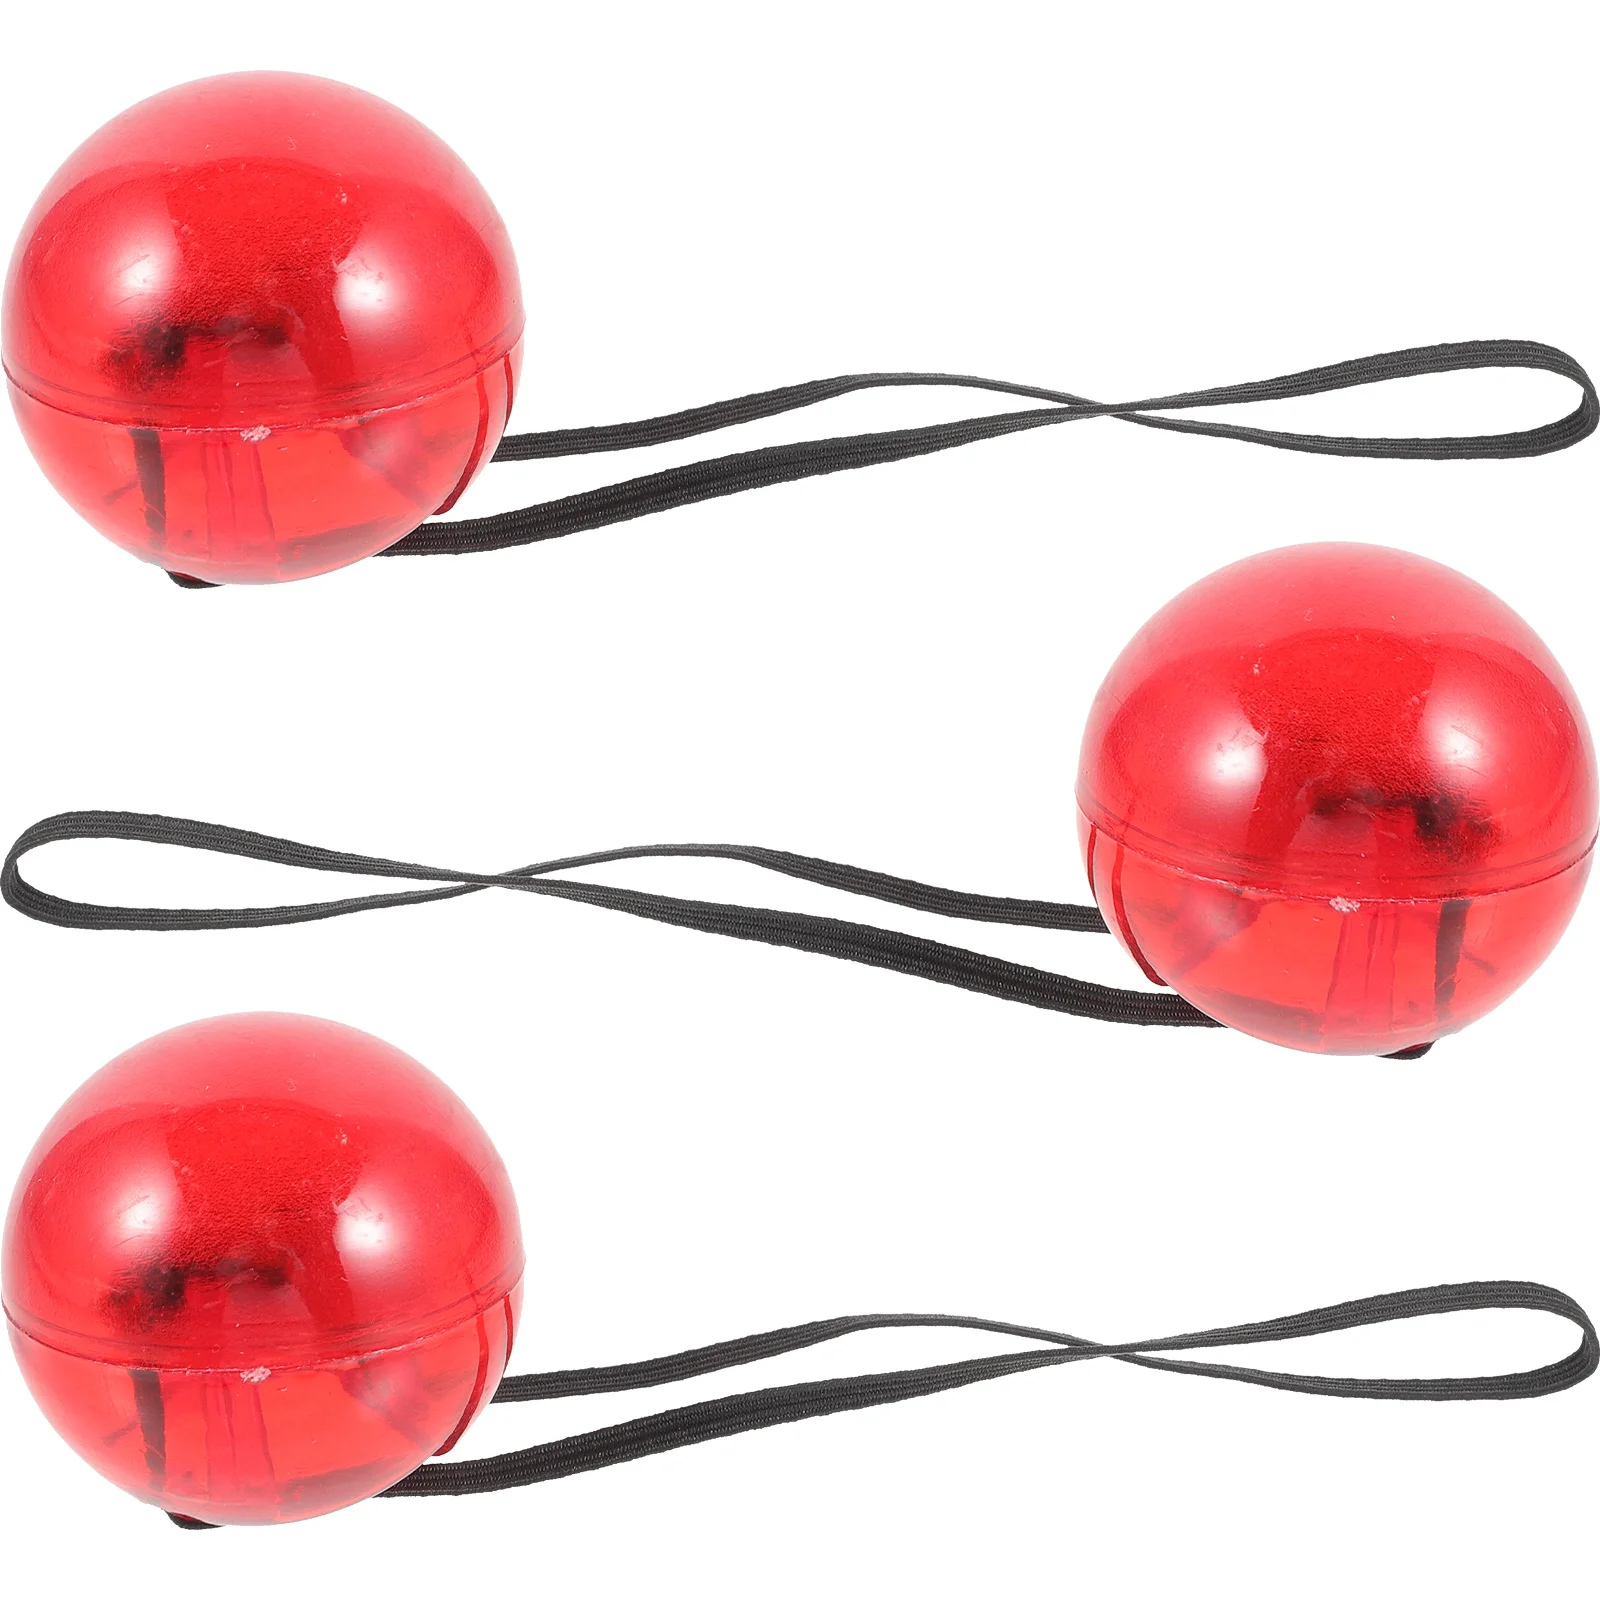 

3 Pcs Clown Nose Party Decor Prop Performance Christmas Decorations Makeup Flashing Red Plastic Glowing Noses Child Bathroom